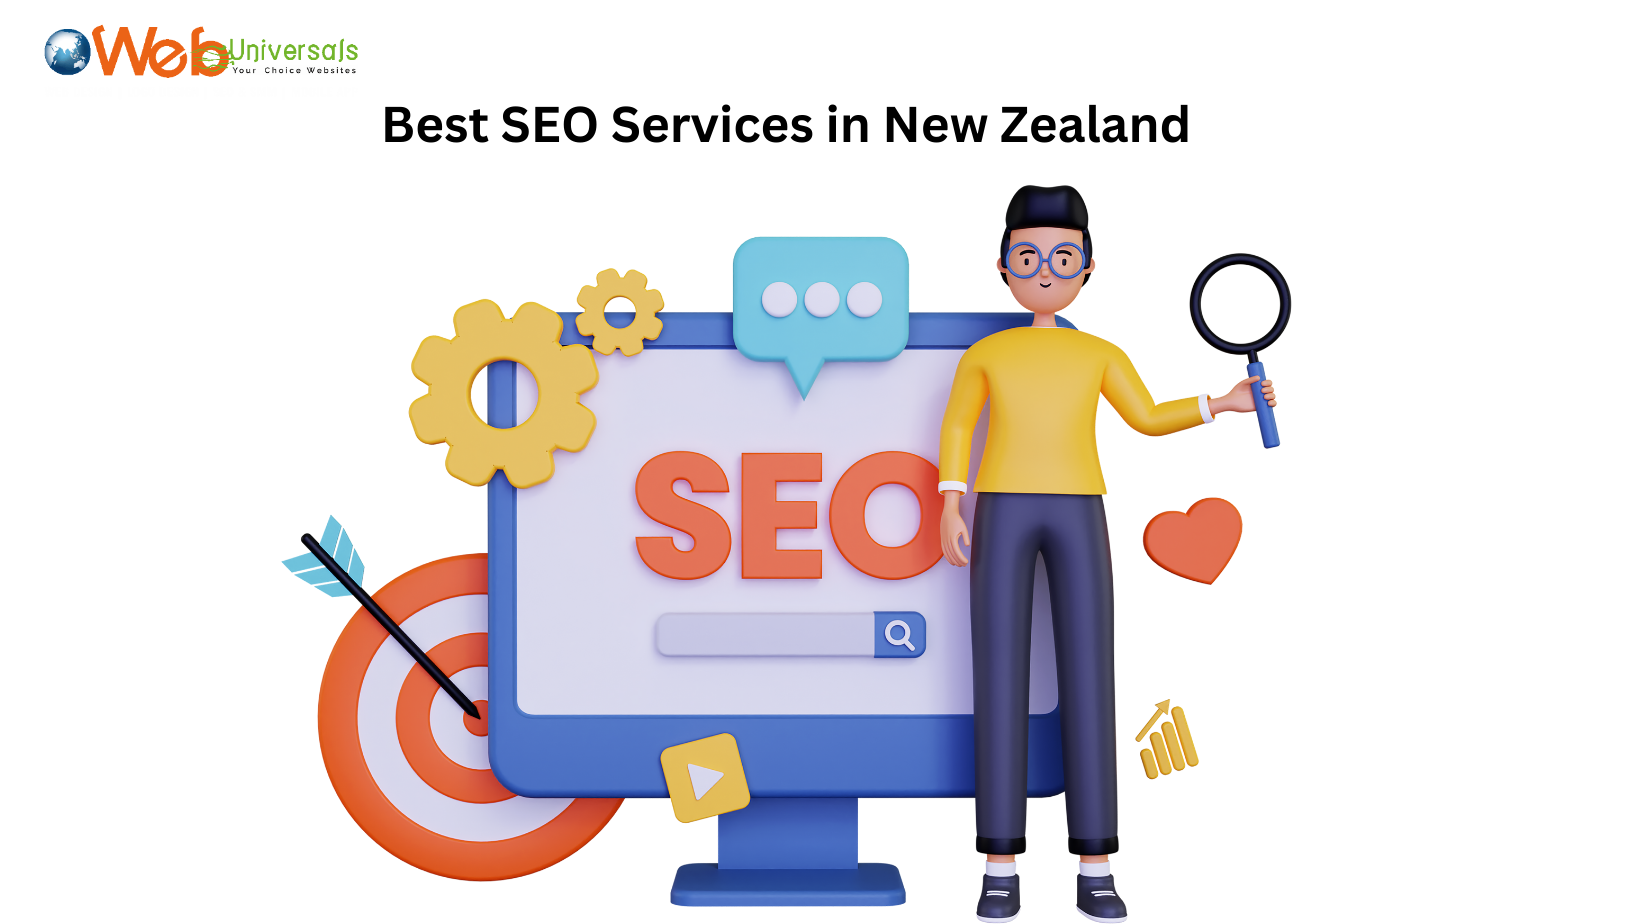 Unlocking Digital Success: WebUniversals Leads the Way with the Best SEO Services in New Zealand